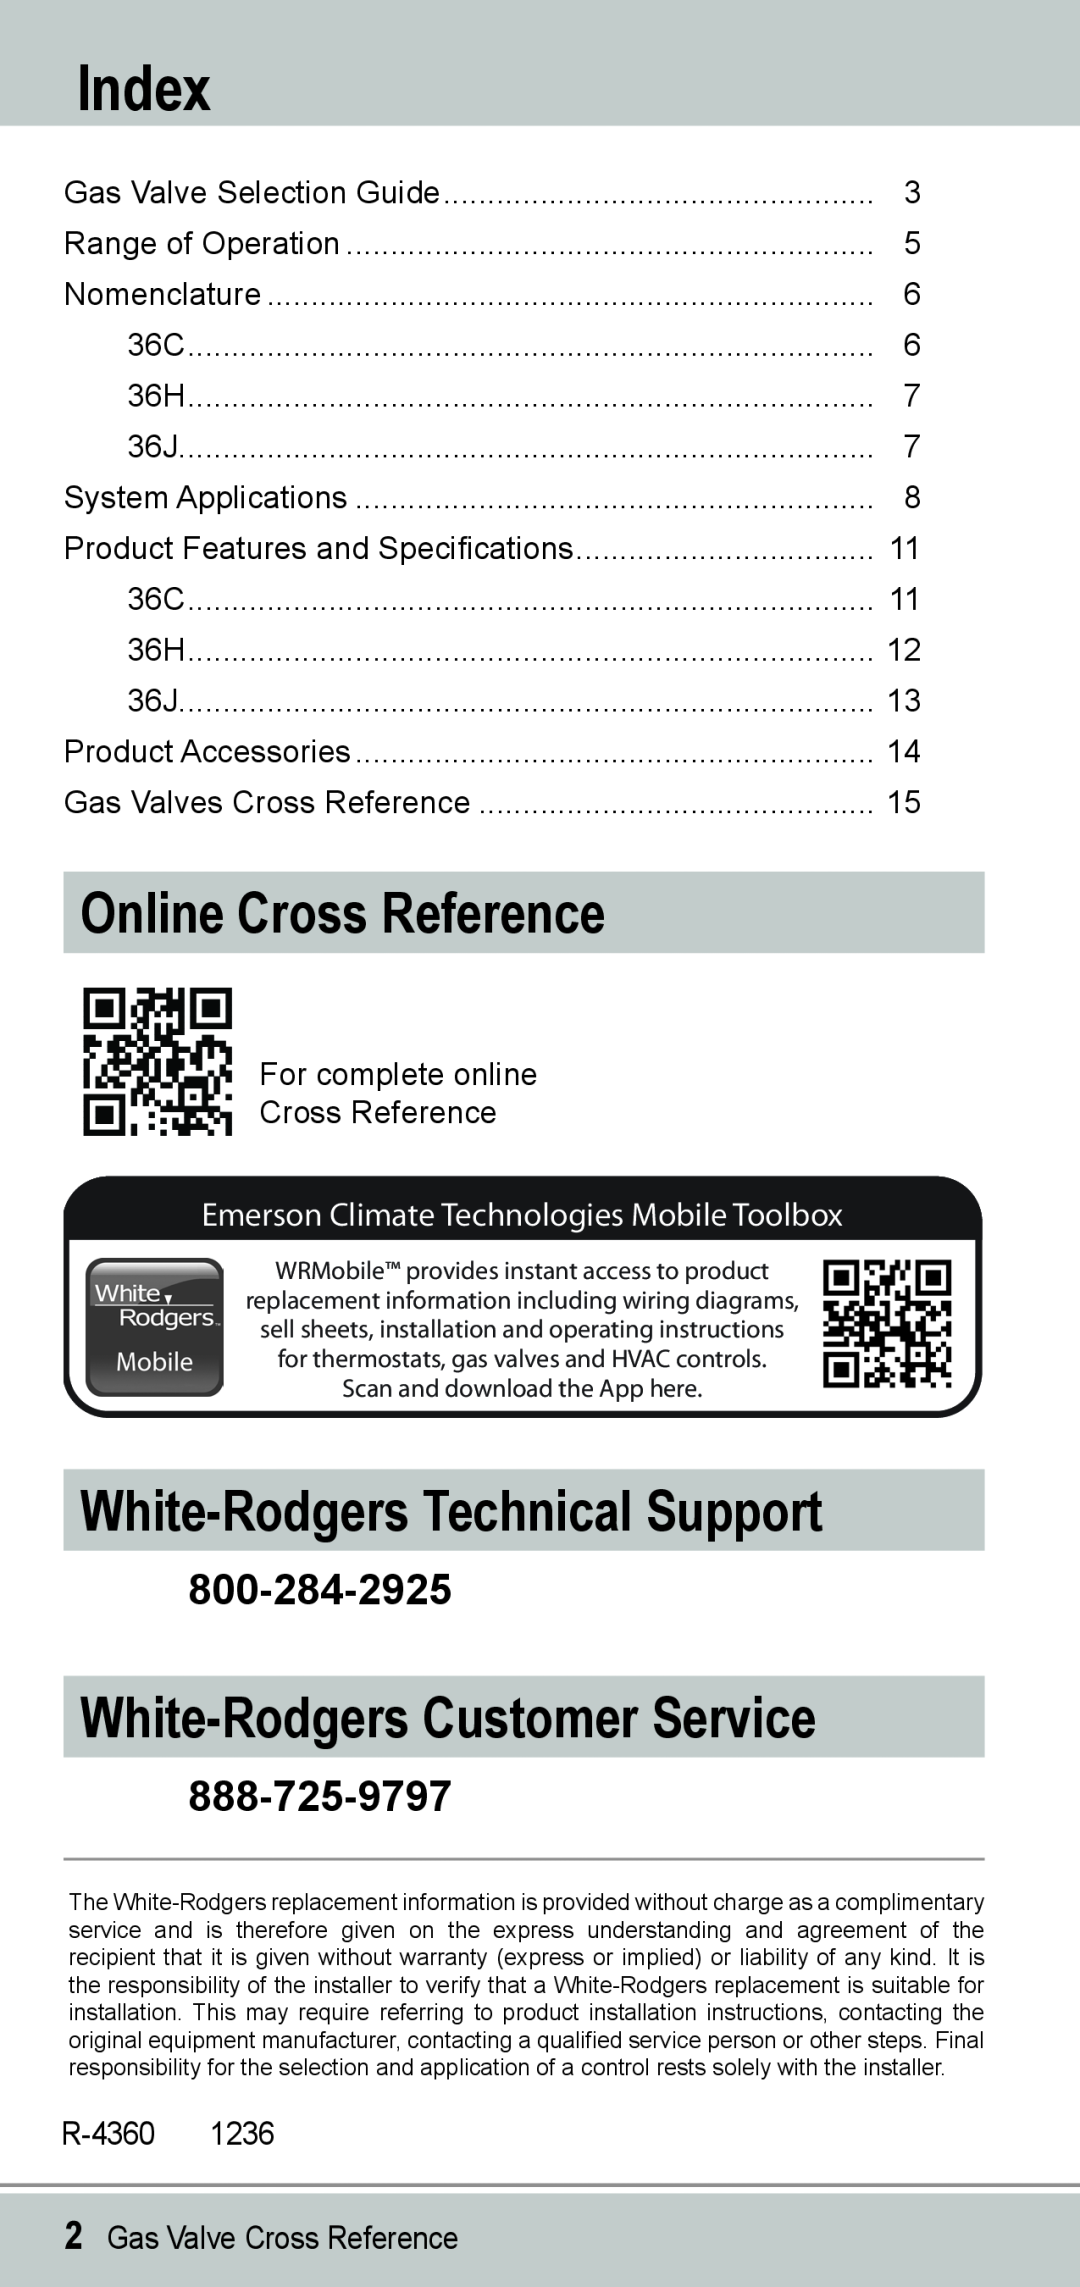 Emerson 36H Online Cross Reference, White-RodgersTechnical Support, White-RodgersCustomer Service, 800-284-2925, Index 